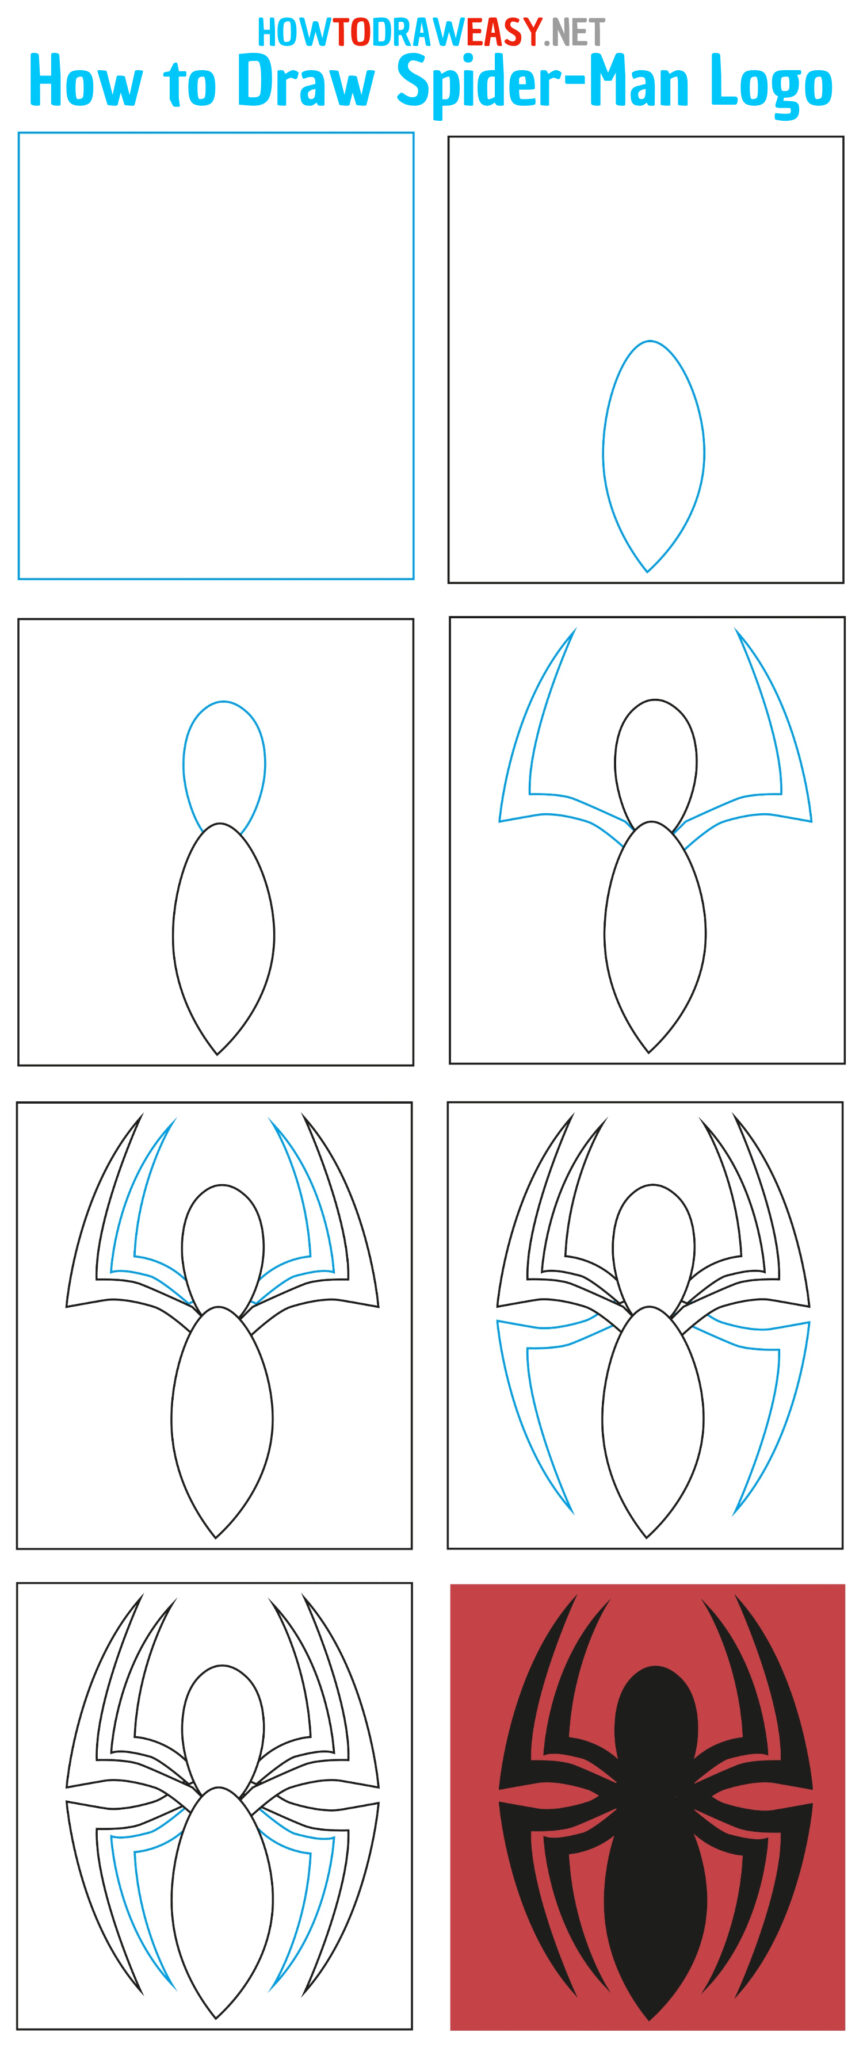 How to Draw the SpiderMan Logo How to Draw Easy